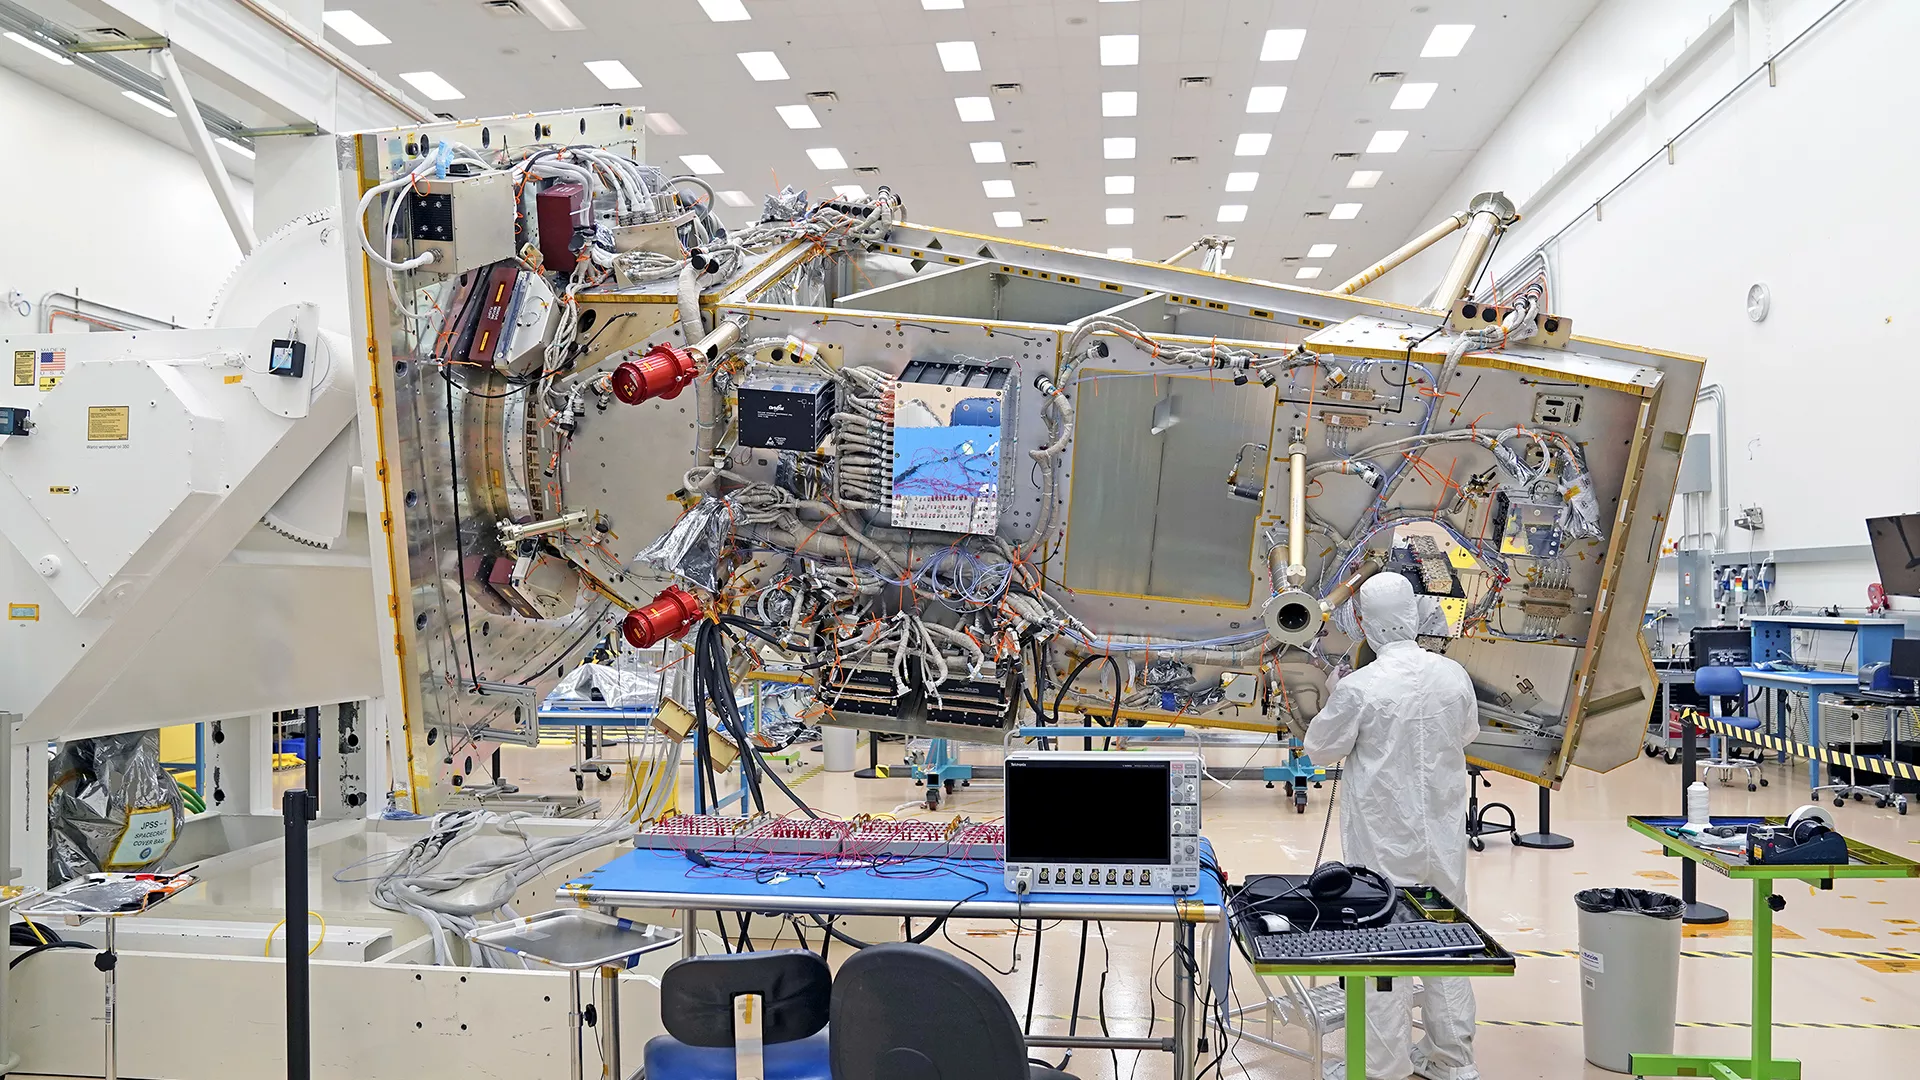 The JPSS-4 spacecraft bus appears in the center of the image as a silver rectangle with wires and hardware covering the surface while a person in a white, bunny suit works towards the right-hand end of the spacecraft. The satellite is attached to a white, rotating fixture in a white room with florescent lights lining the ceiling. A blue desk with two chairs and a monitor sits in the bottom center of the image. Two green, rolling tables also appear in the bottom of the image.